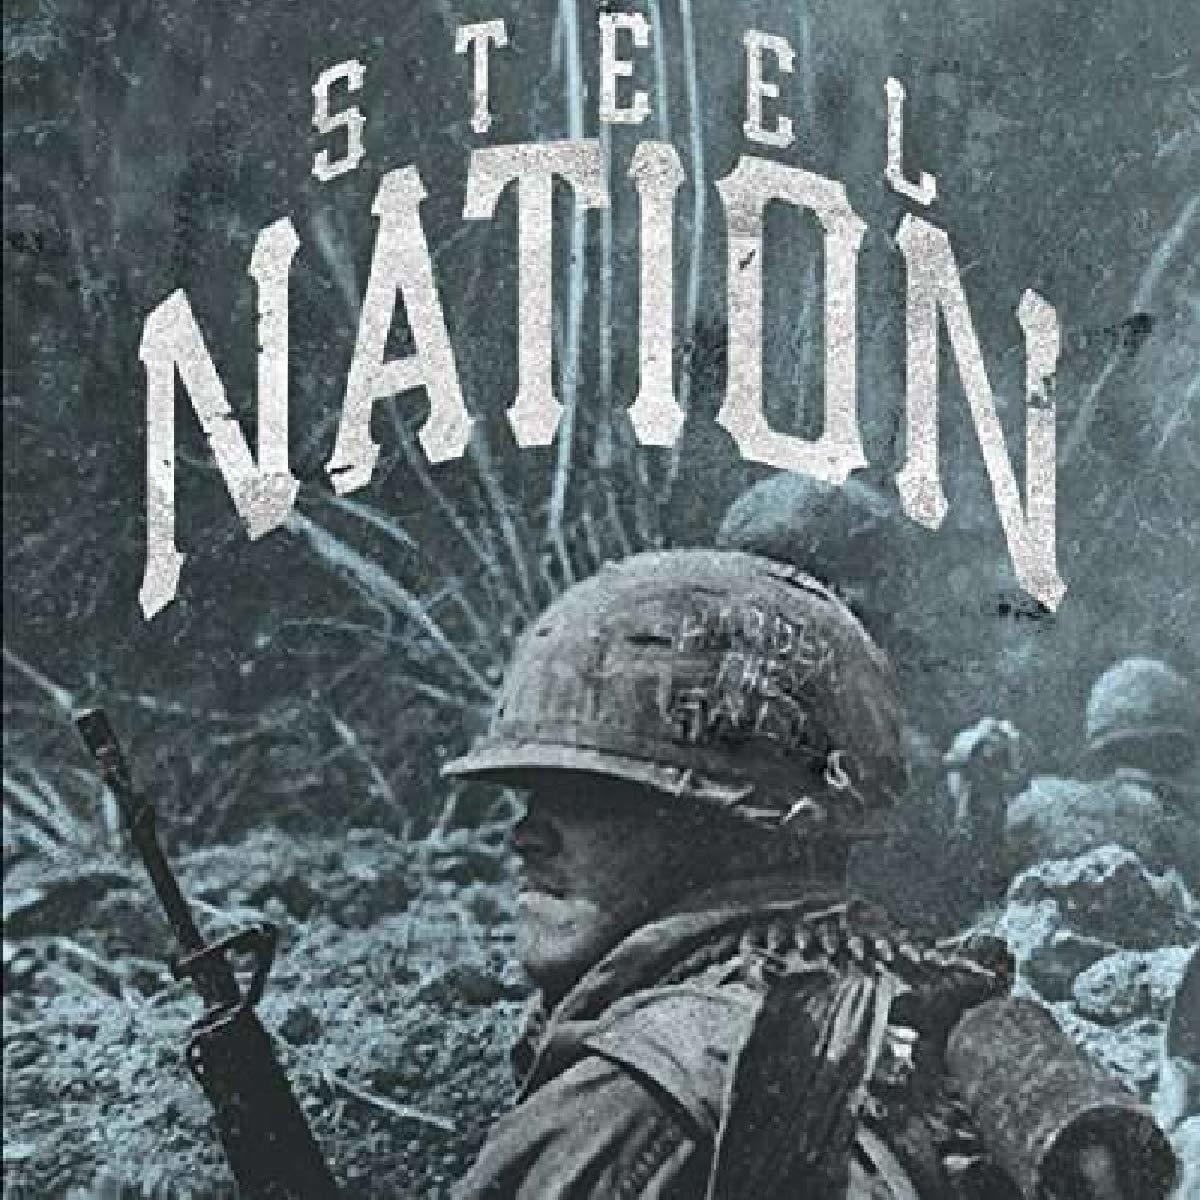 (Vinyl) The - Fall Harder Steel Nation - They